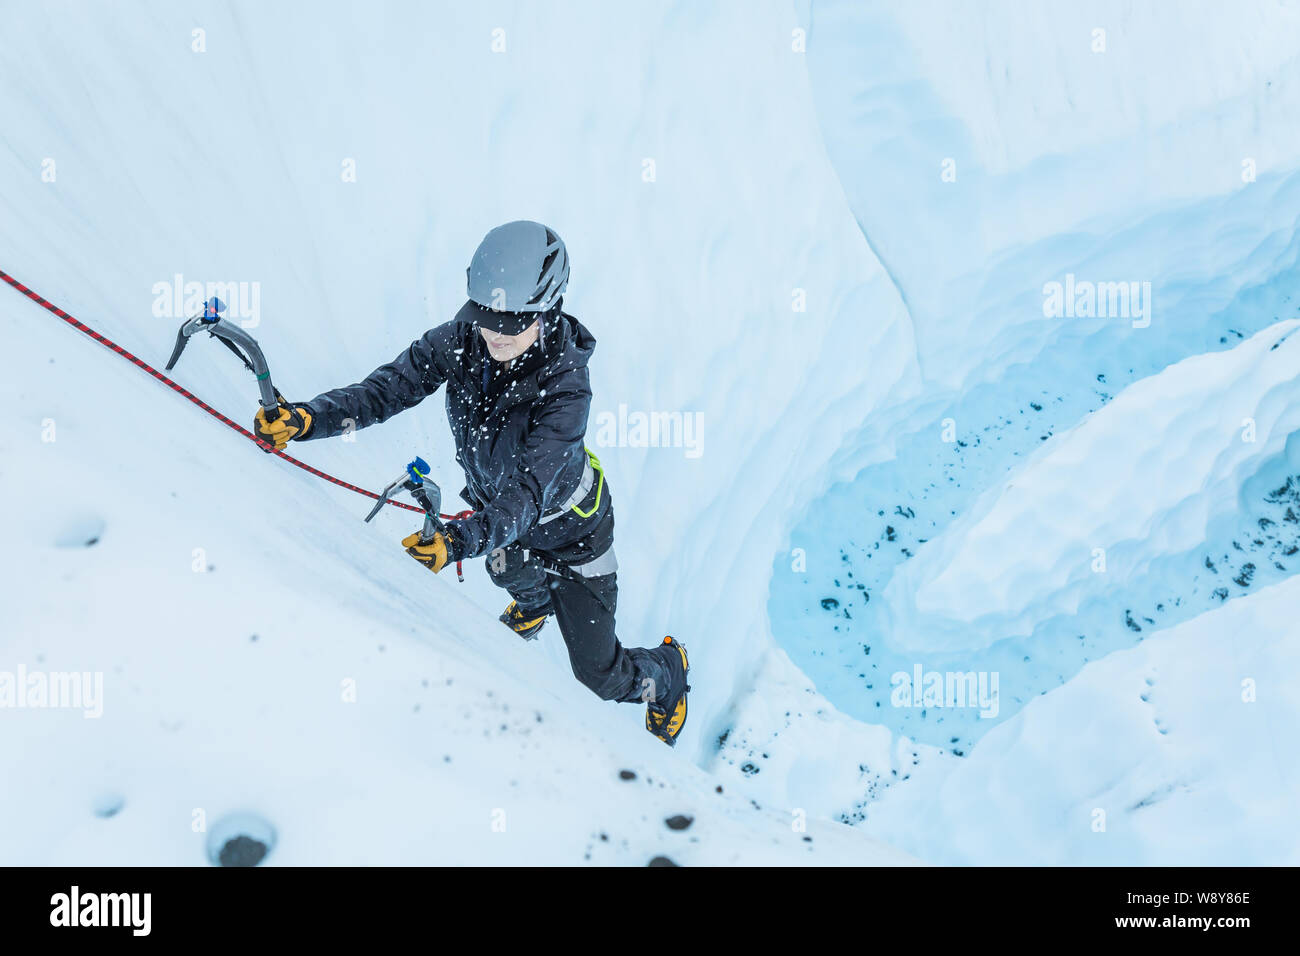 Woman smashes a tool into glacier ice as she climbs a steep pitch over a glacial river. The ice explodes into small pieces when the tool strikes it. Stock Photo